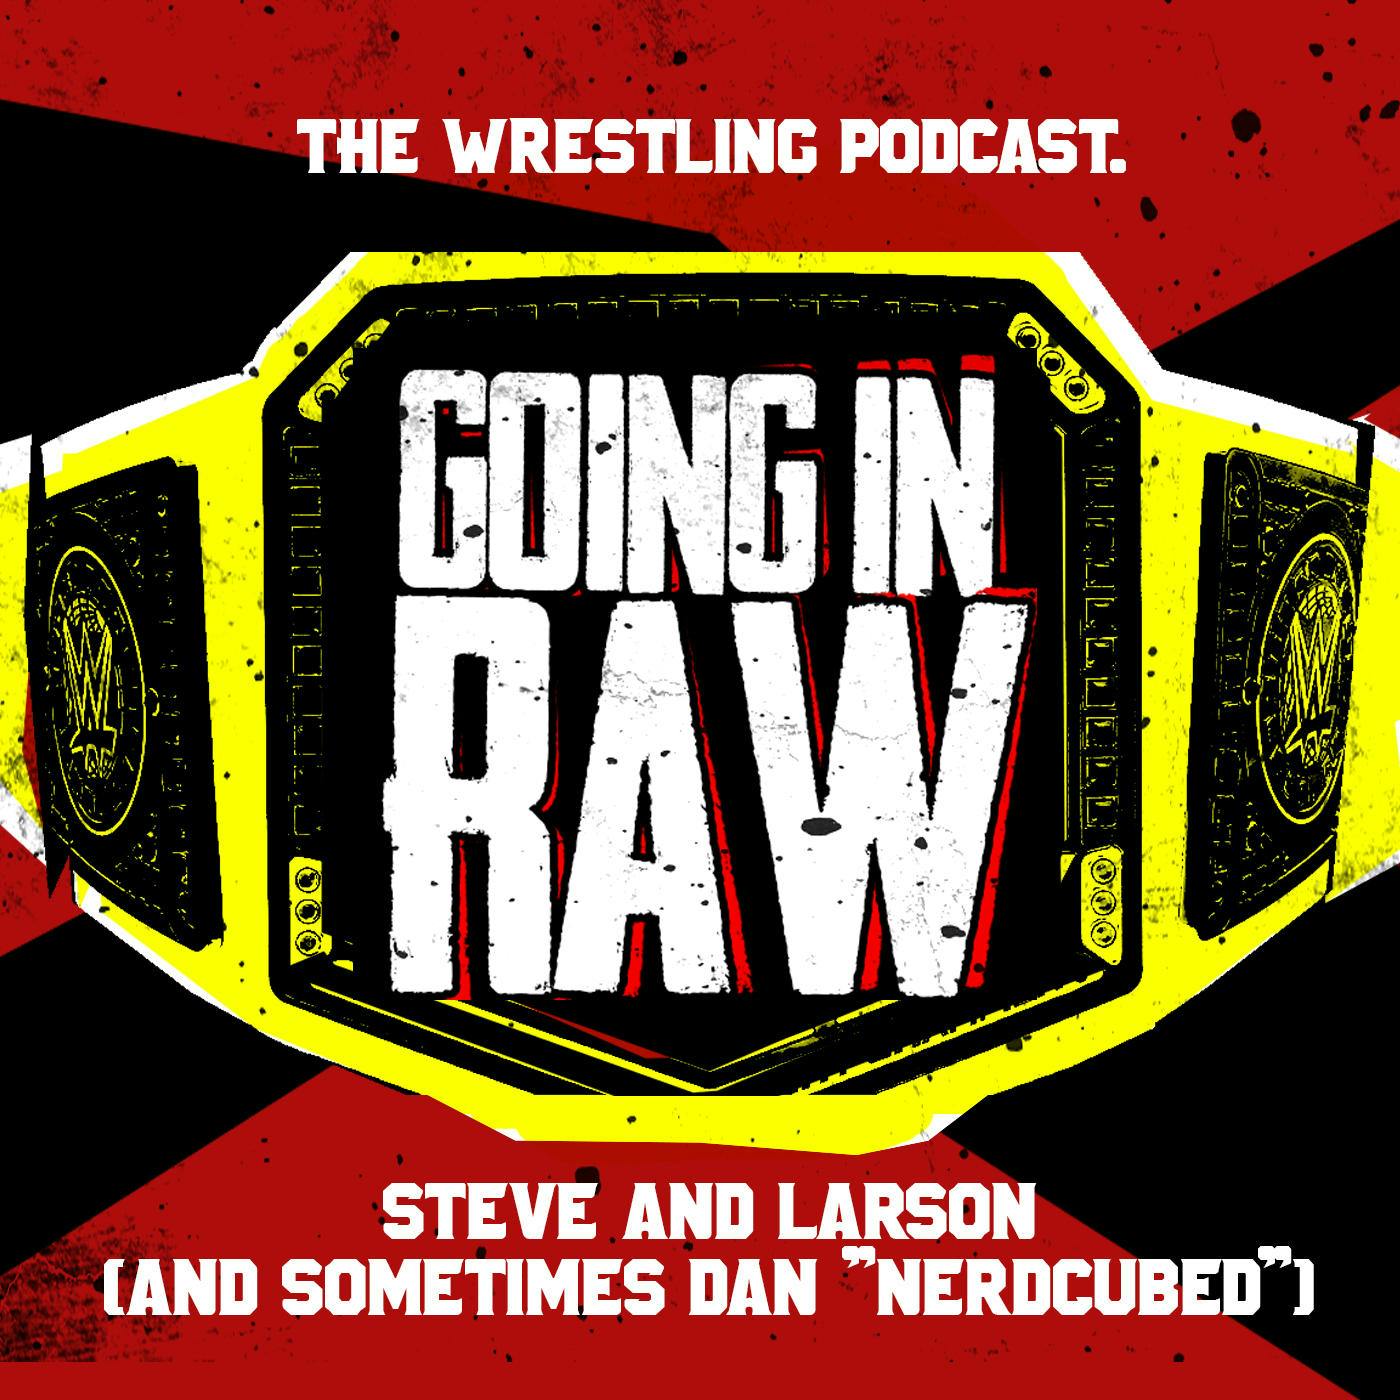 BOBBY ROODE BETTER AS A FACE? WHO IS WWE'S TOP HIGH FLYER? (Going In Raw Dirt Sheet Podcast Ep. 65)